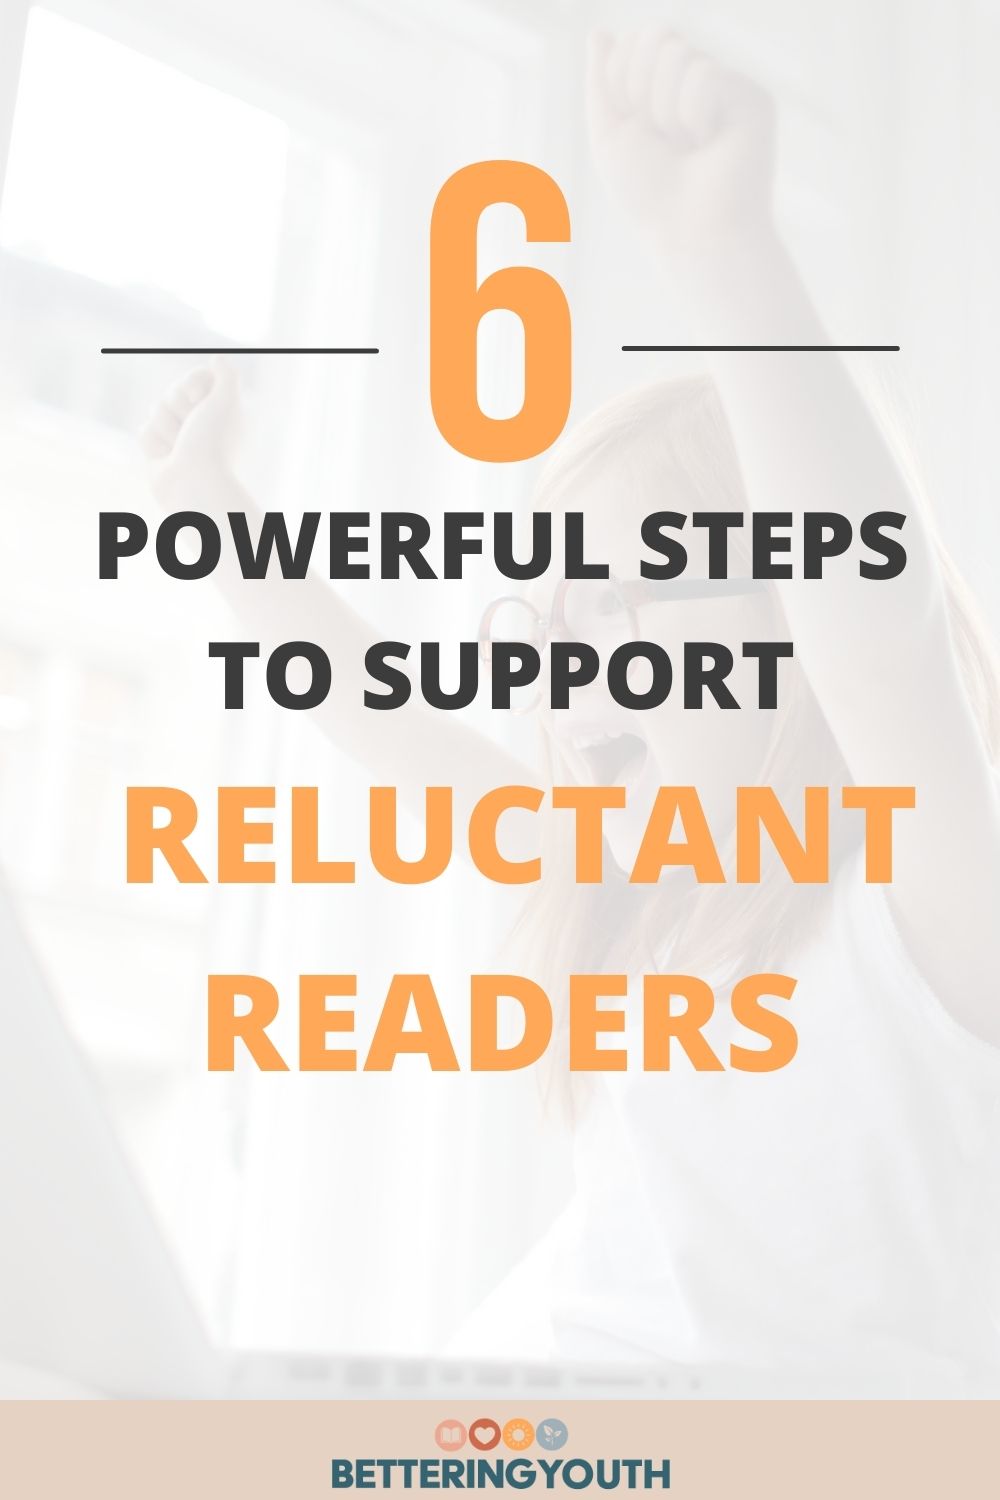 6 Powerful Steps to Support Reluctant and Struggling Readers